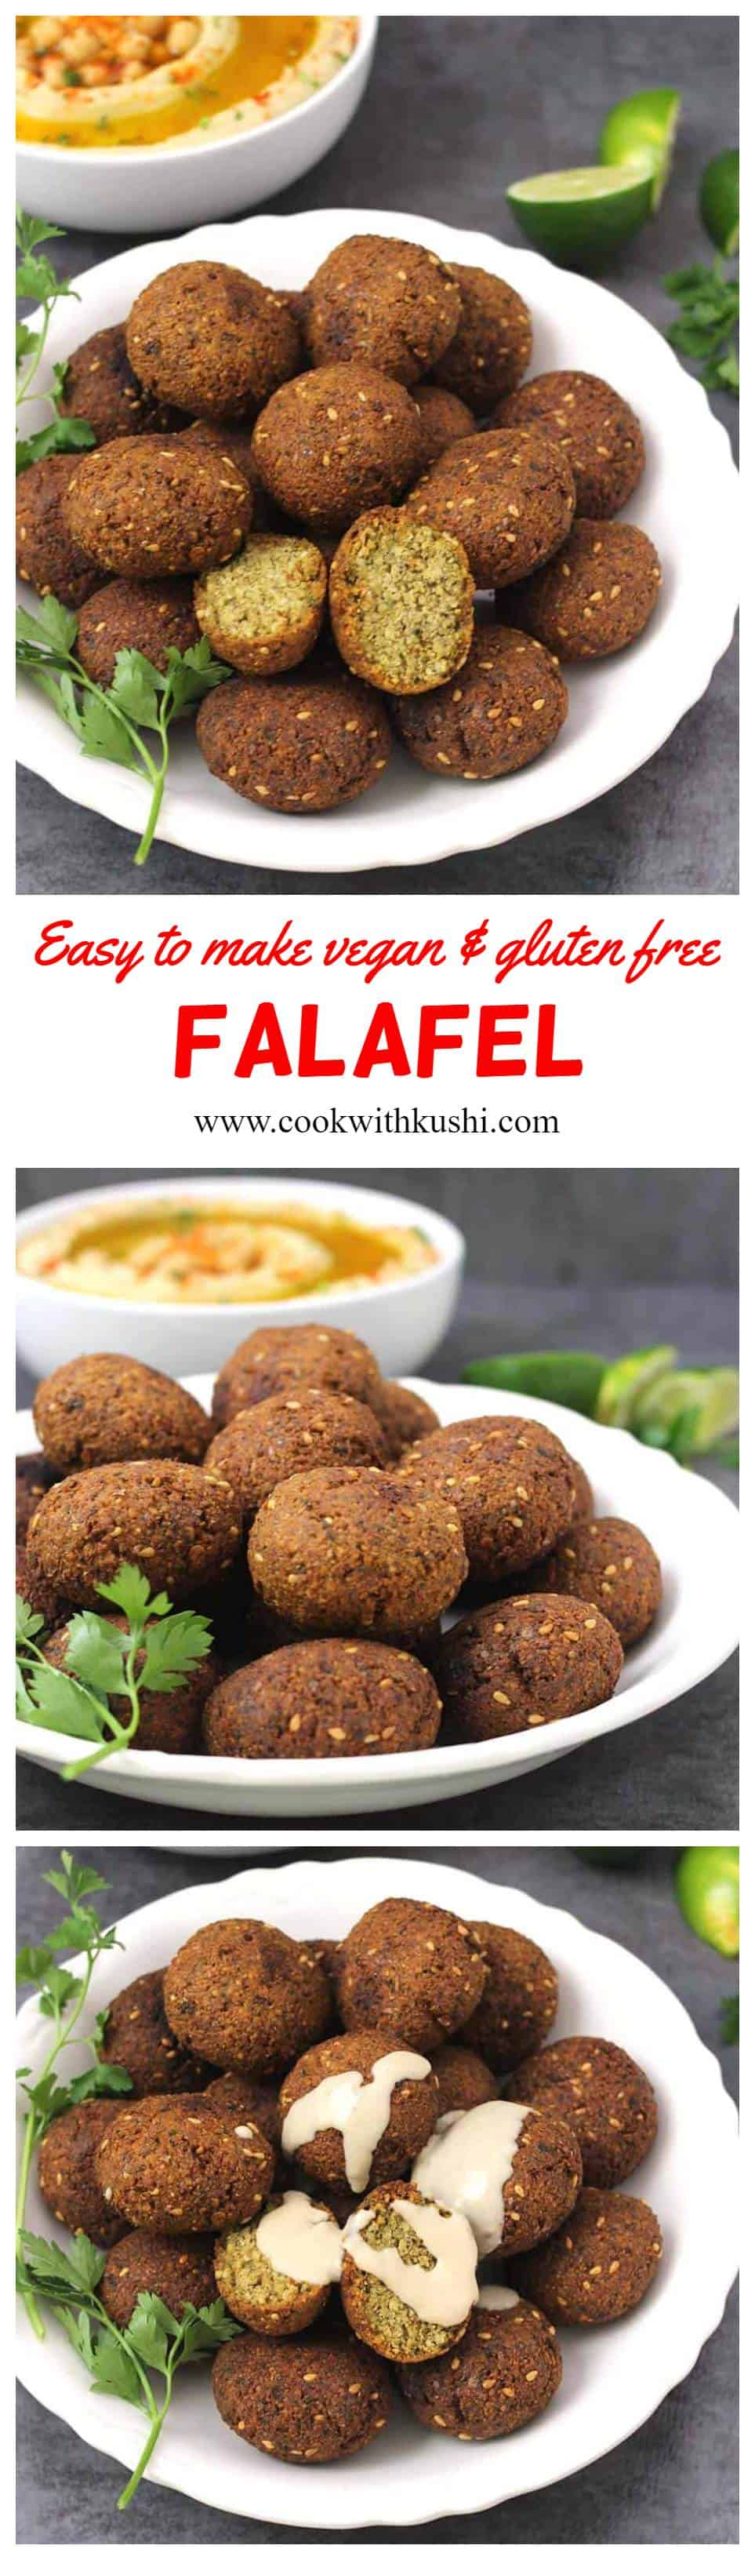 Falafel is a deep fried vegan or vegetarian, gluten free fritter or patty which is crispy on the outside, light and tender, flavorful inside prepared using chickpeas, fresh herbs and spices. #falafel #middleeastfood #partyfood #appetizer #fingerfod #snacks #pitasandwich #tahinisauce #buddhabowl #ricebowl #vegetarianmeals #footballfood #gamenightfood #vegansnacks #glutenfreesnacks 